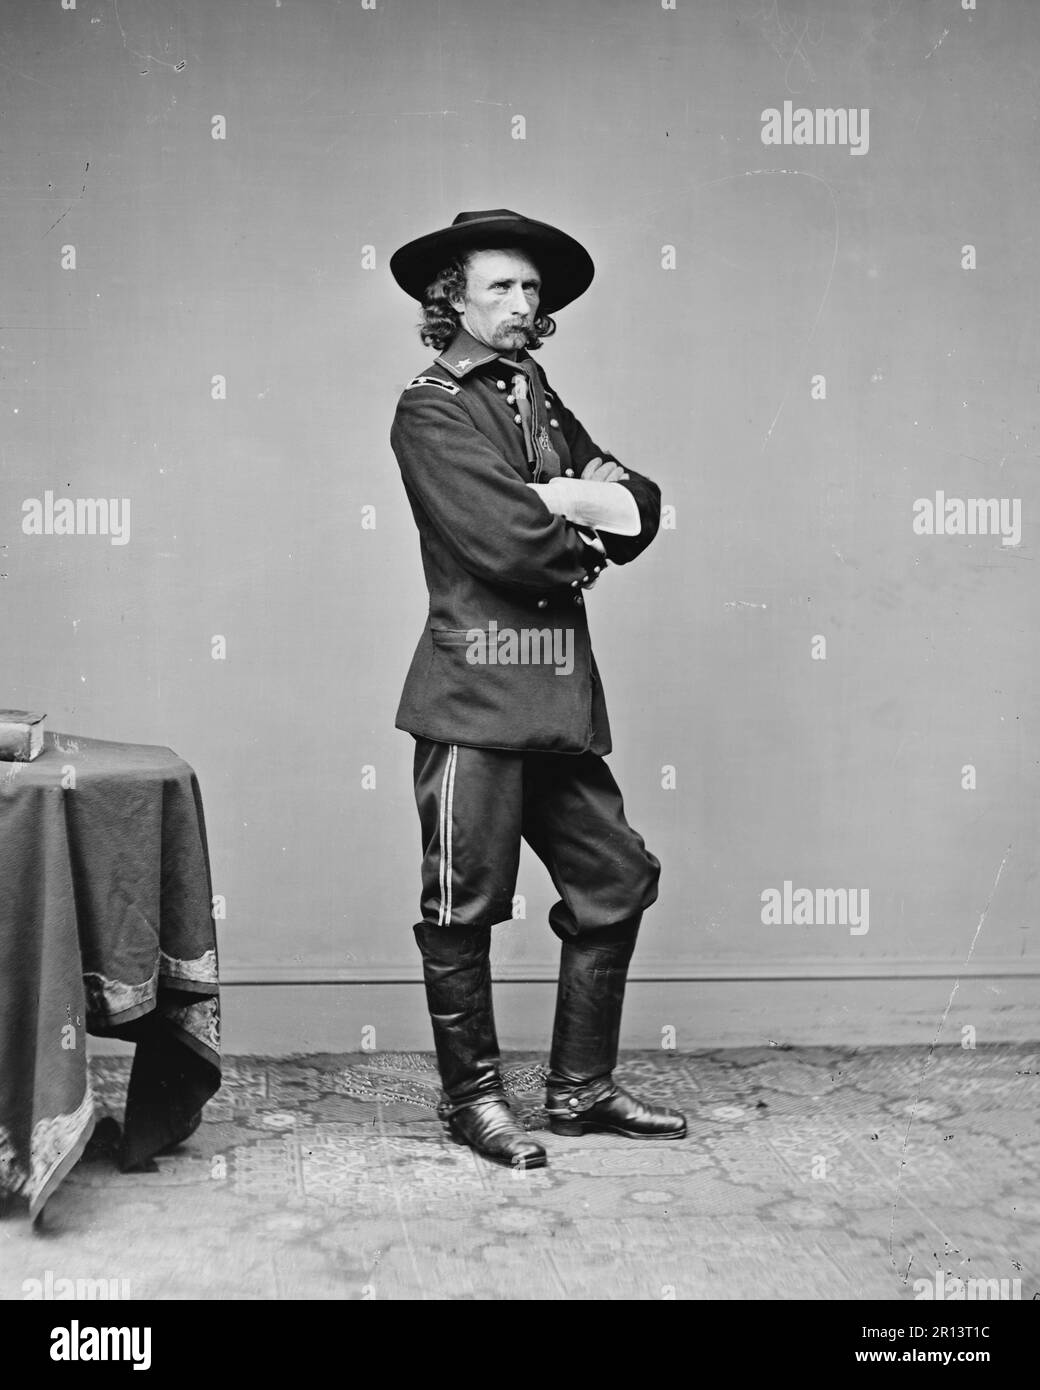 General George Custer, U.S. Army -Full length standing.Annotation from negative, scratched on emulsion: Genl. Custer, 510, 13239; in pencil: Gen. Custer. Photographed between 1860 and 1865. Stock Photo